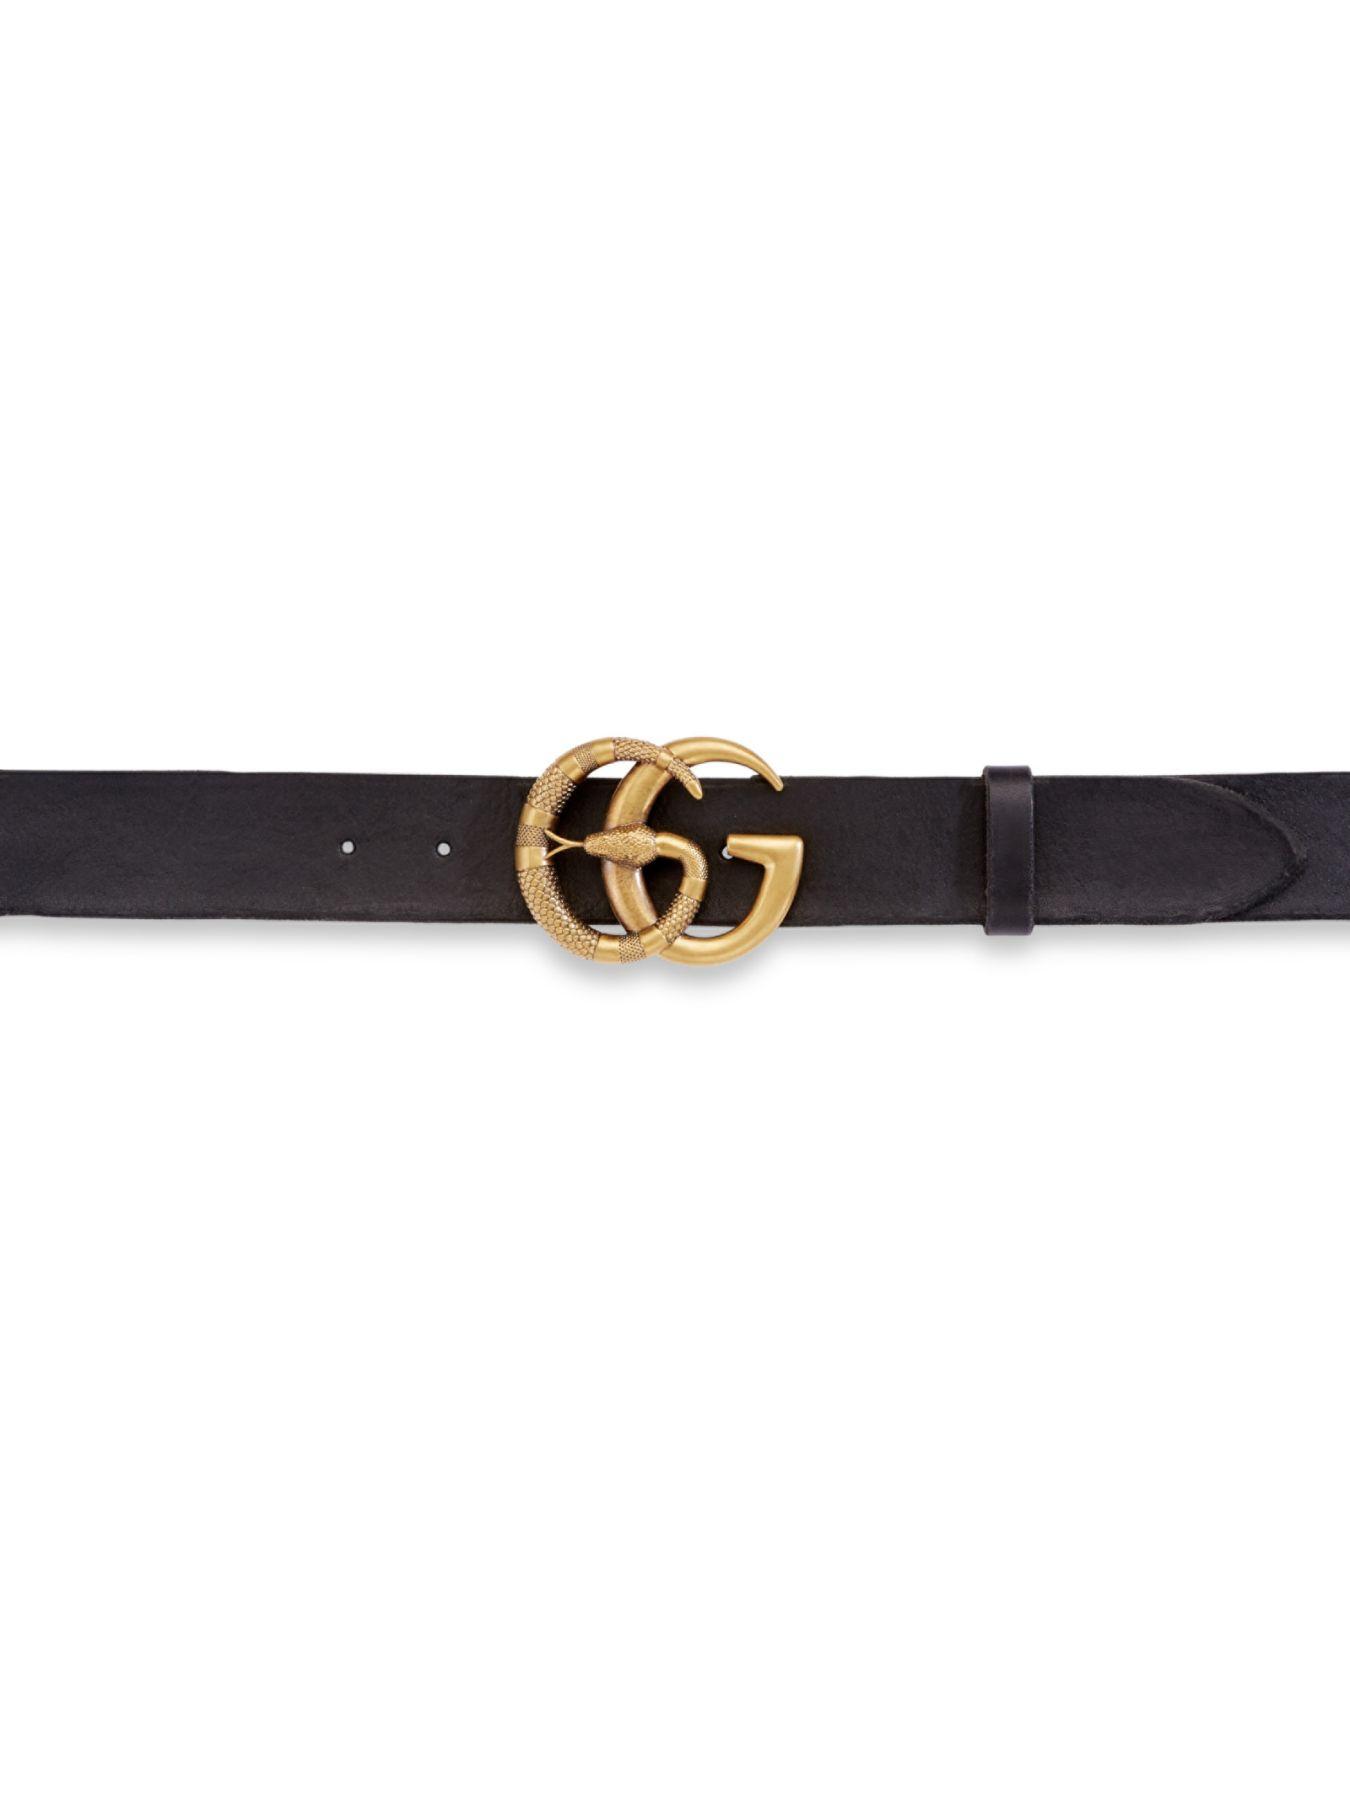 Gucci Double G Leather Belt in Black for Men - Lyst